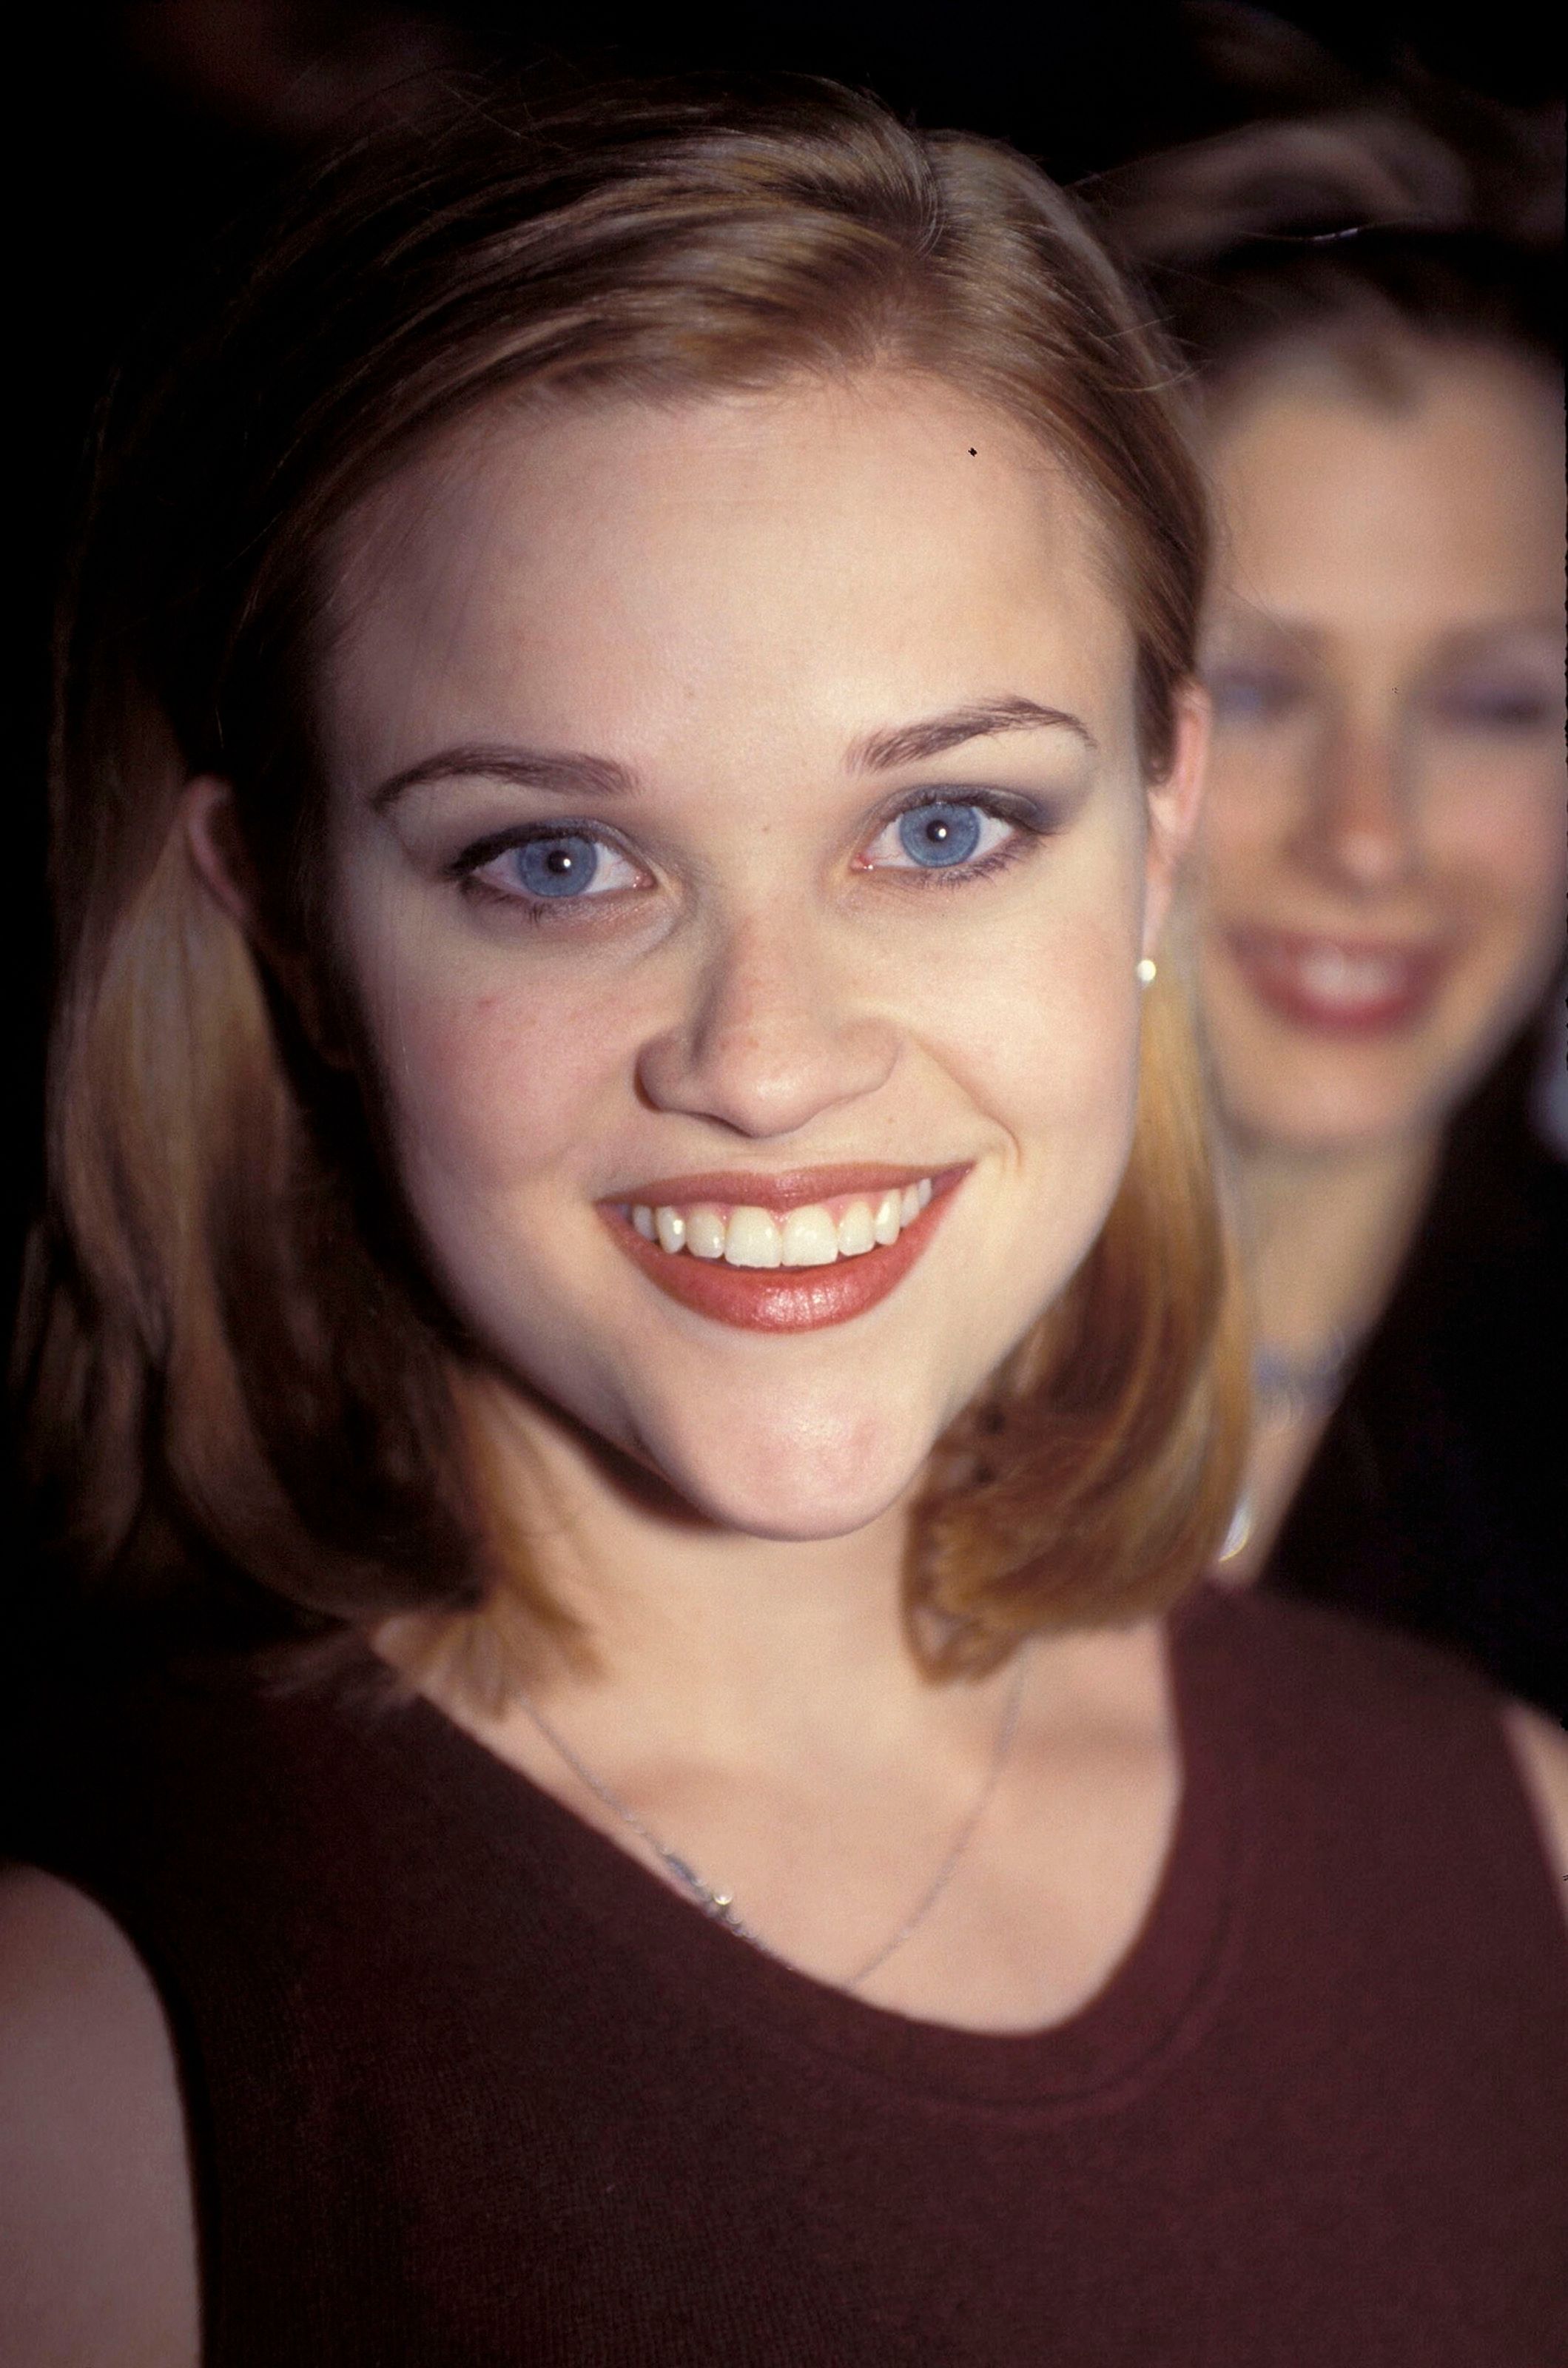 Reese Witherspoon at the Sydney "Fear" film premiere in Sydney, Australia on August 1, 1996 | Photo: Getty Images